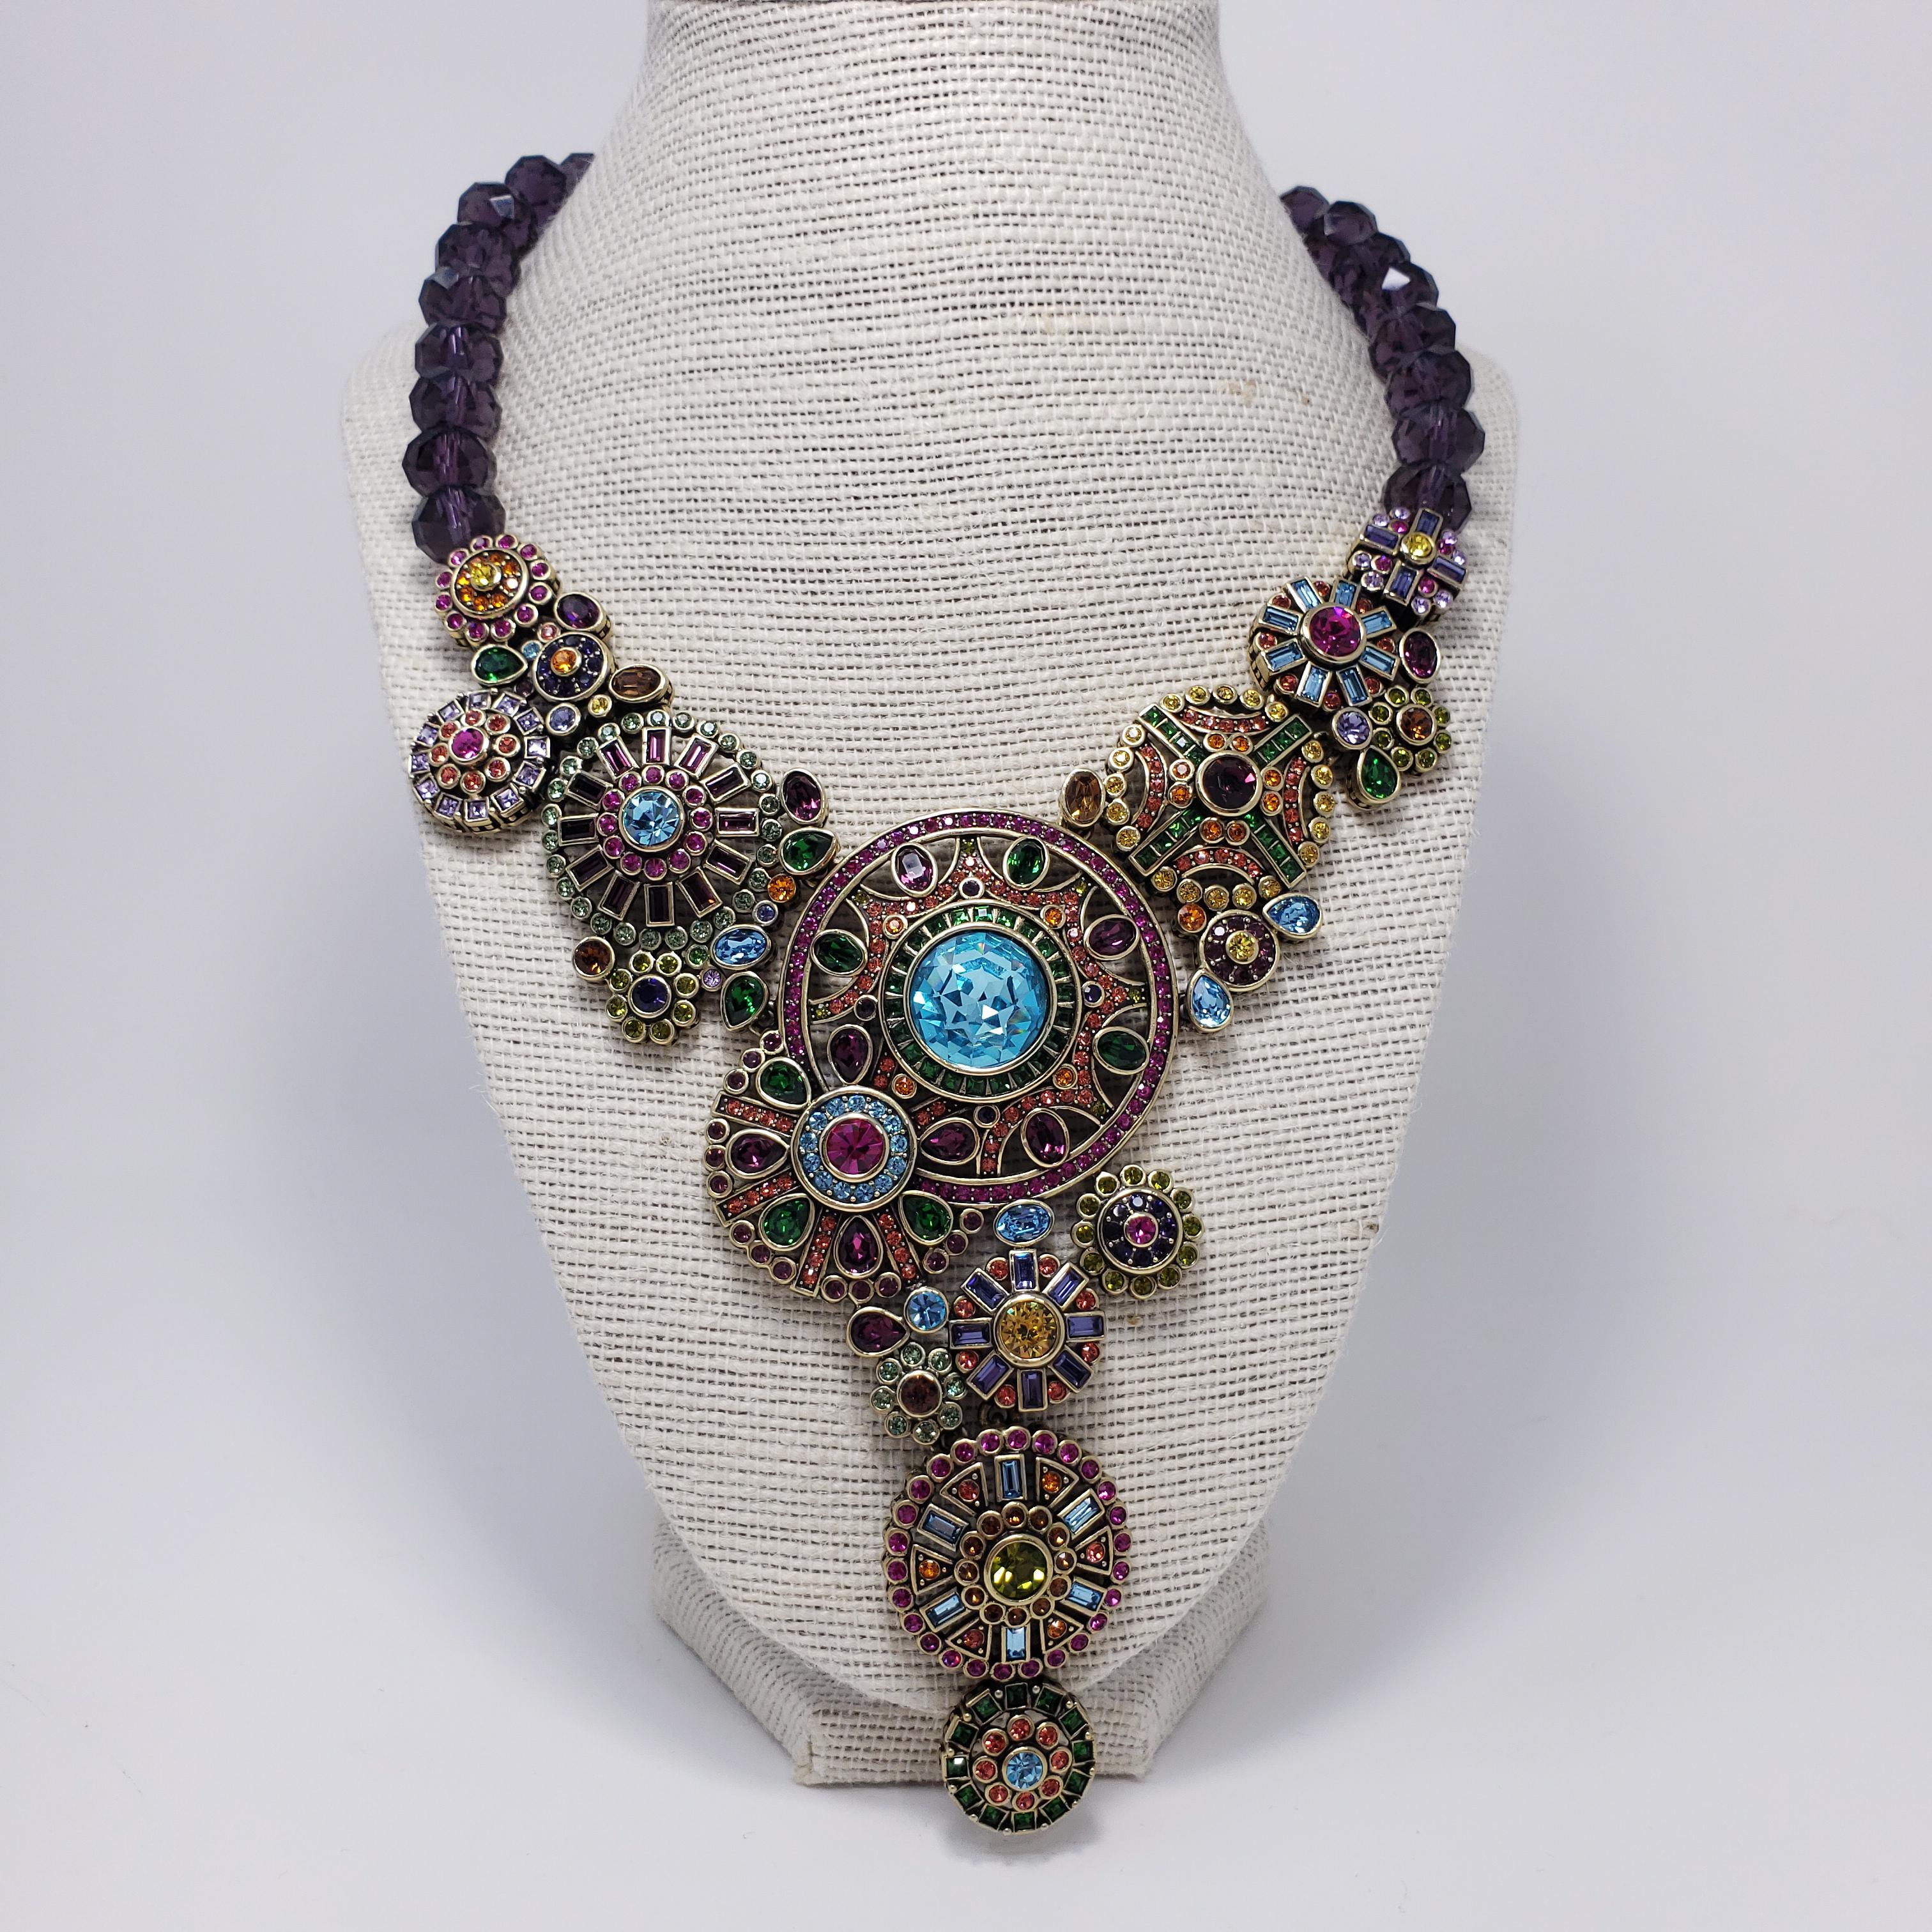 Heidi Daus ornate pendant necklace. Features large round flower and abstract motifs adorned with colorful crystals. Amethyst crystal necklace.

Hallmarks: Heidi Daus, China

Pendant Dimensions: 7.5 cm / 3 in by 7.5 cm / 3 in
Necklace Length 40 cm /